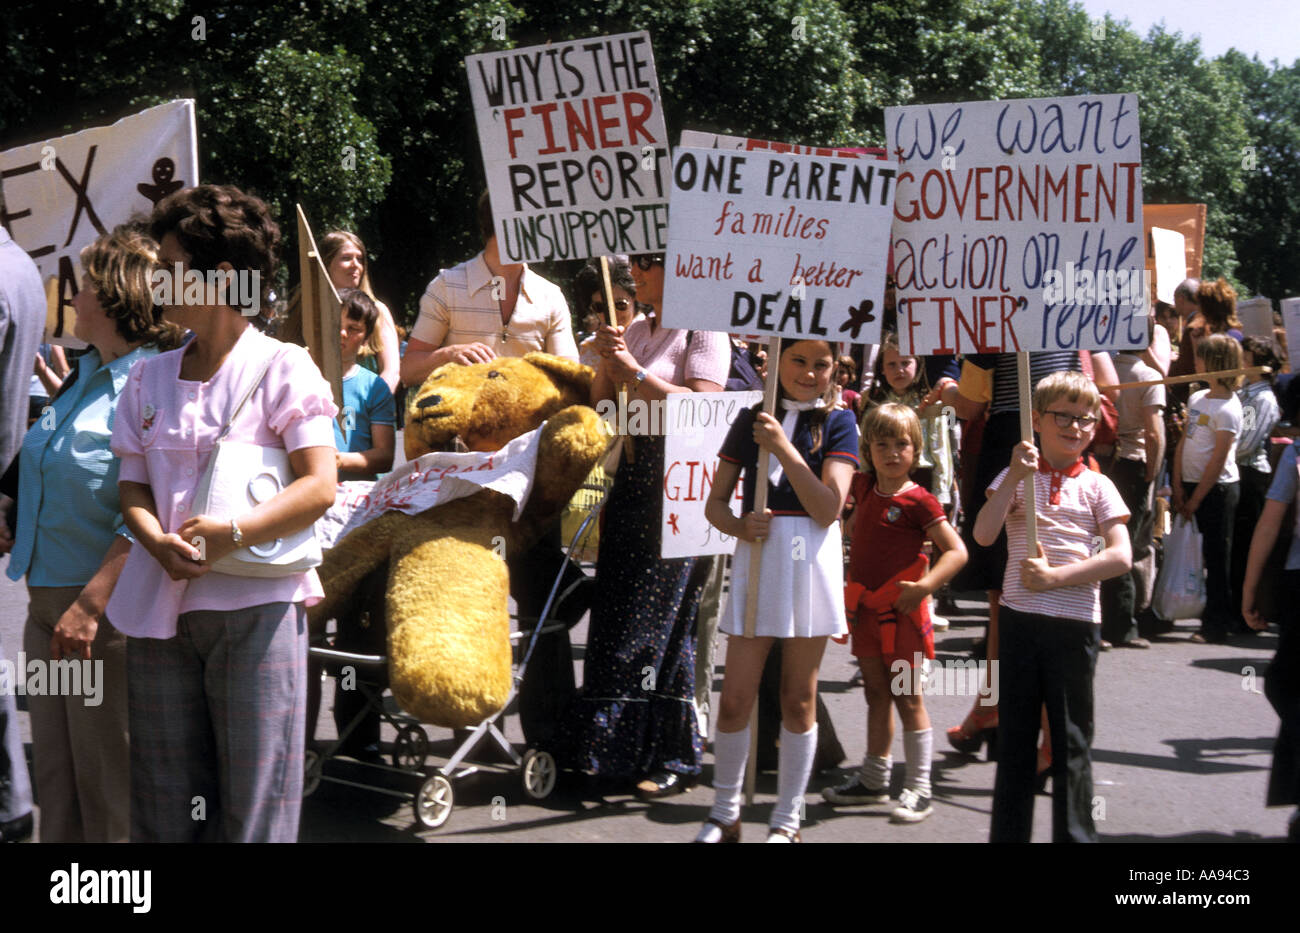 Demonstration fighting for rights for one parent families. Stock Photo